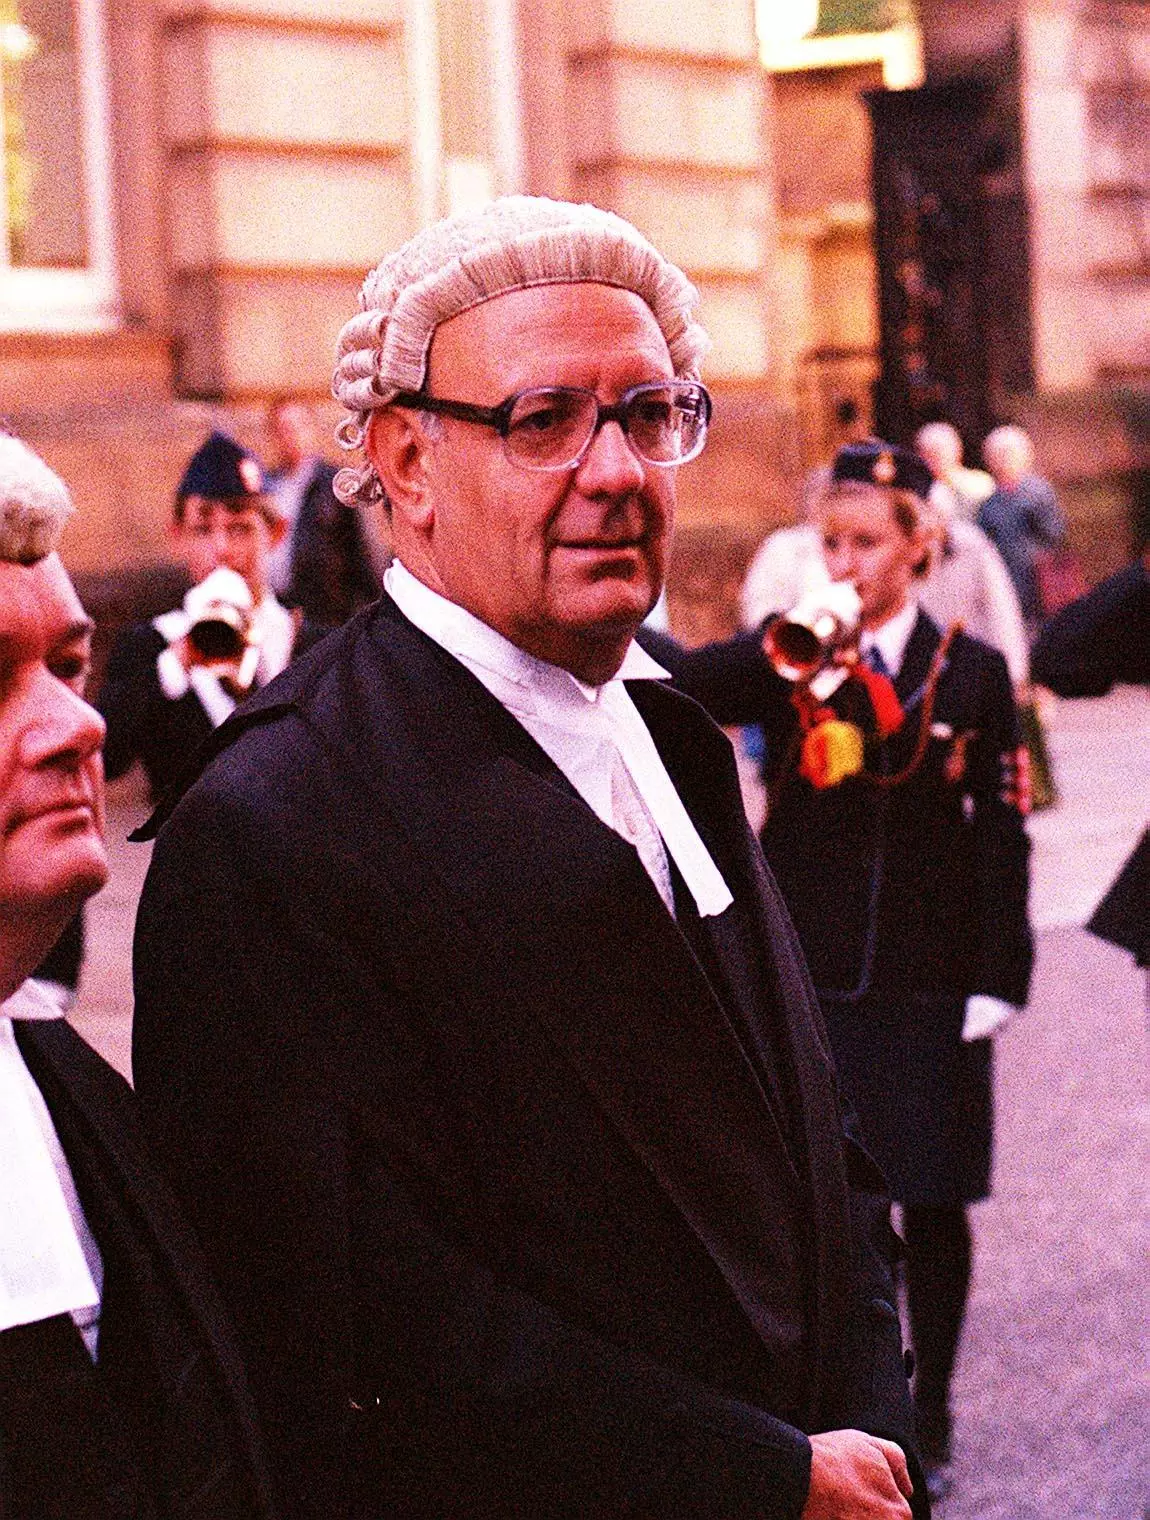 Sir Richard Henriques at the trial of Harold Shipman in 1998.